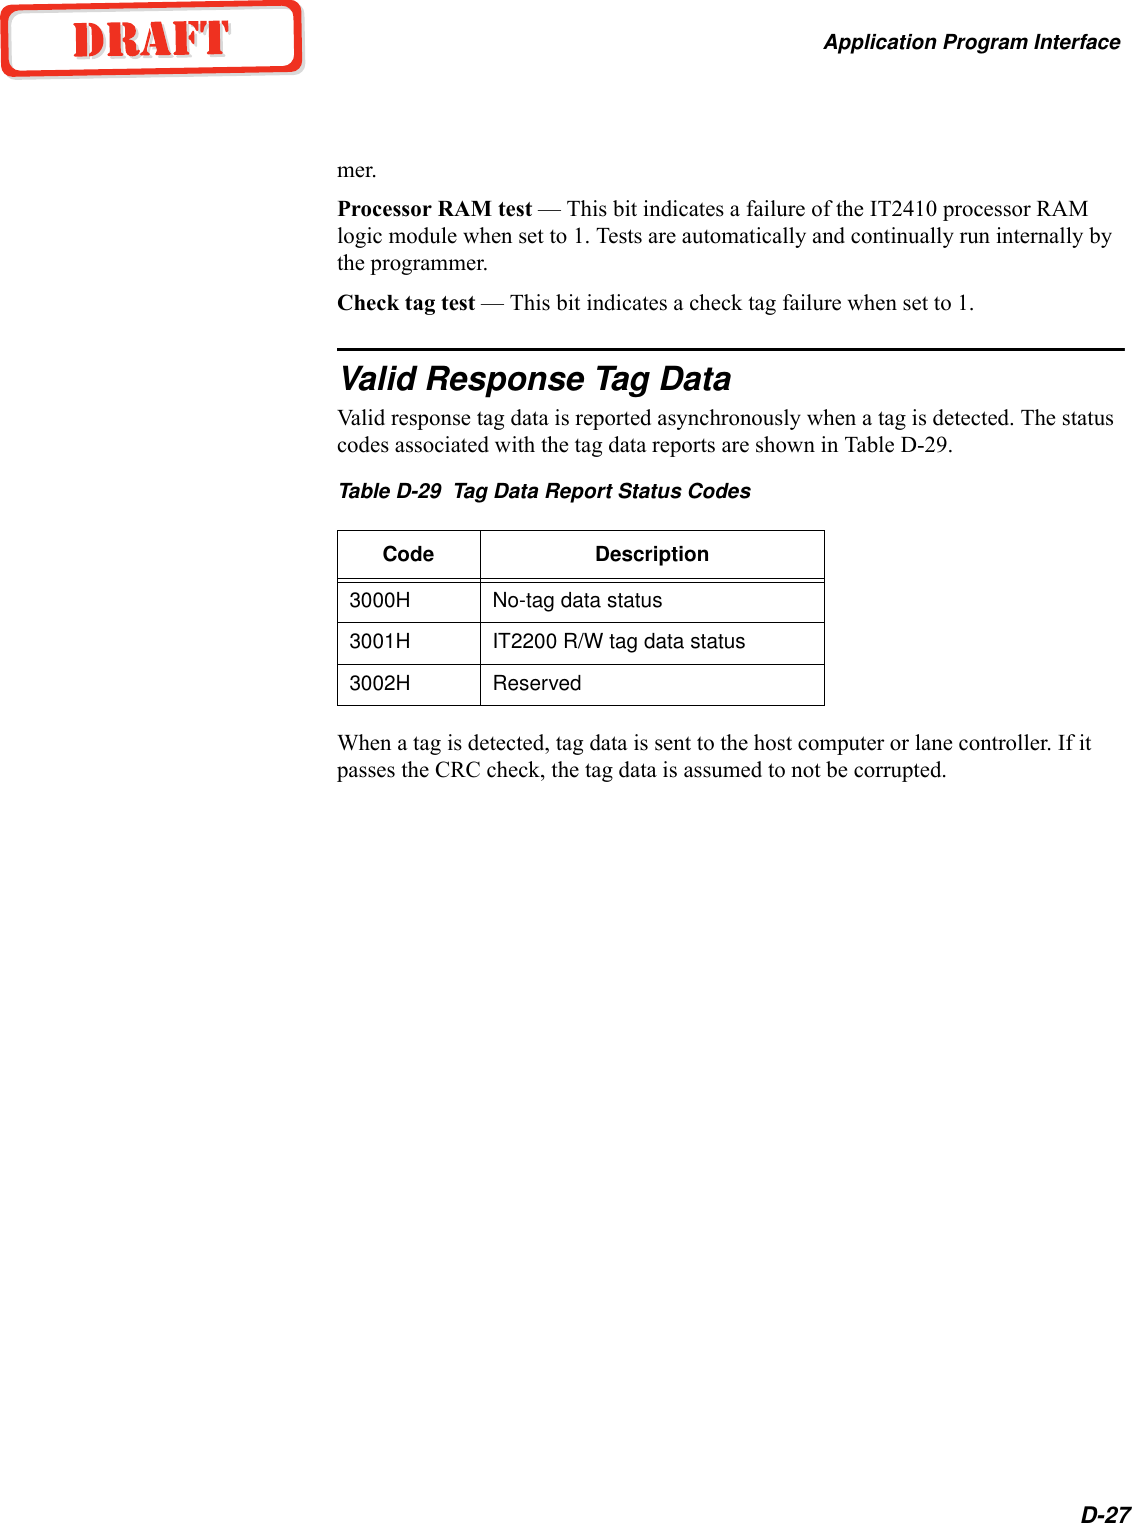 Application Program InterfaceD-27mer.Processor RAM test — This bit indicates a failure of the IT2410 processor RAM logic module when set to 1. Tests are automatically and continually run internally by the programmer.Check tag test — This bit indicates a check tag failure when set to 1.Valid Response Tag DataValid response tag data is reported asynchronously when a tag is detected. The status codes associated with the tag data reports are shown in Table D-29.Table D-29  Tag Data Report Status CodesWhen a tag is detected, tag data is sent to the host computer or lane controller. If it passes the CRC check, the tag data is assumed to not be corrupted.Code Description3000H No-tag data status3001H IT2200 R/W tag data status3002H Reserved